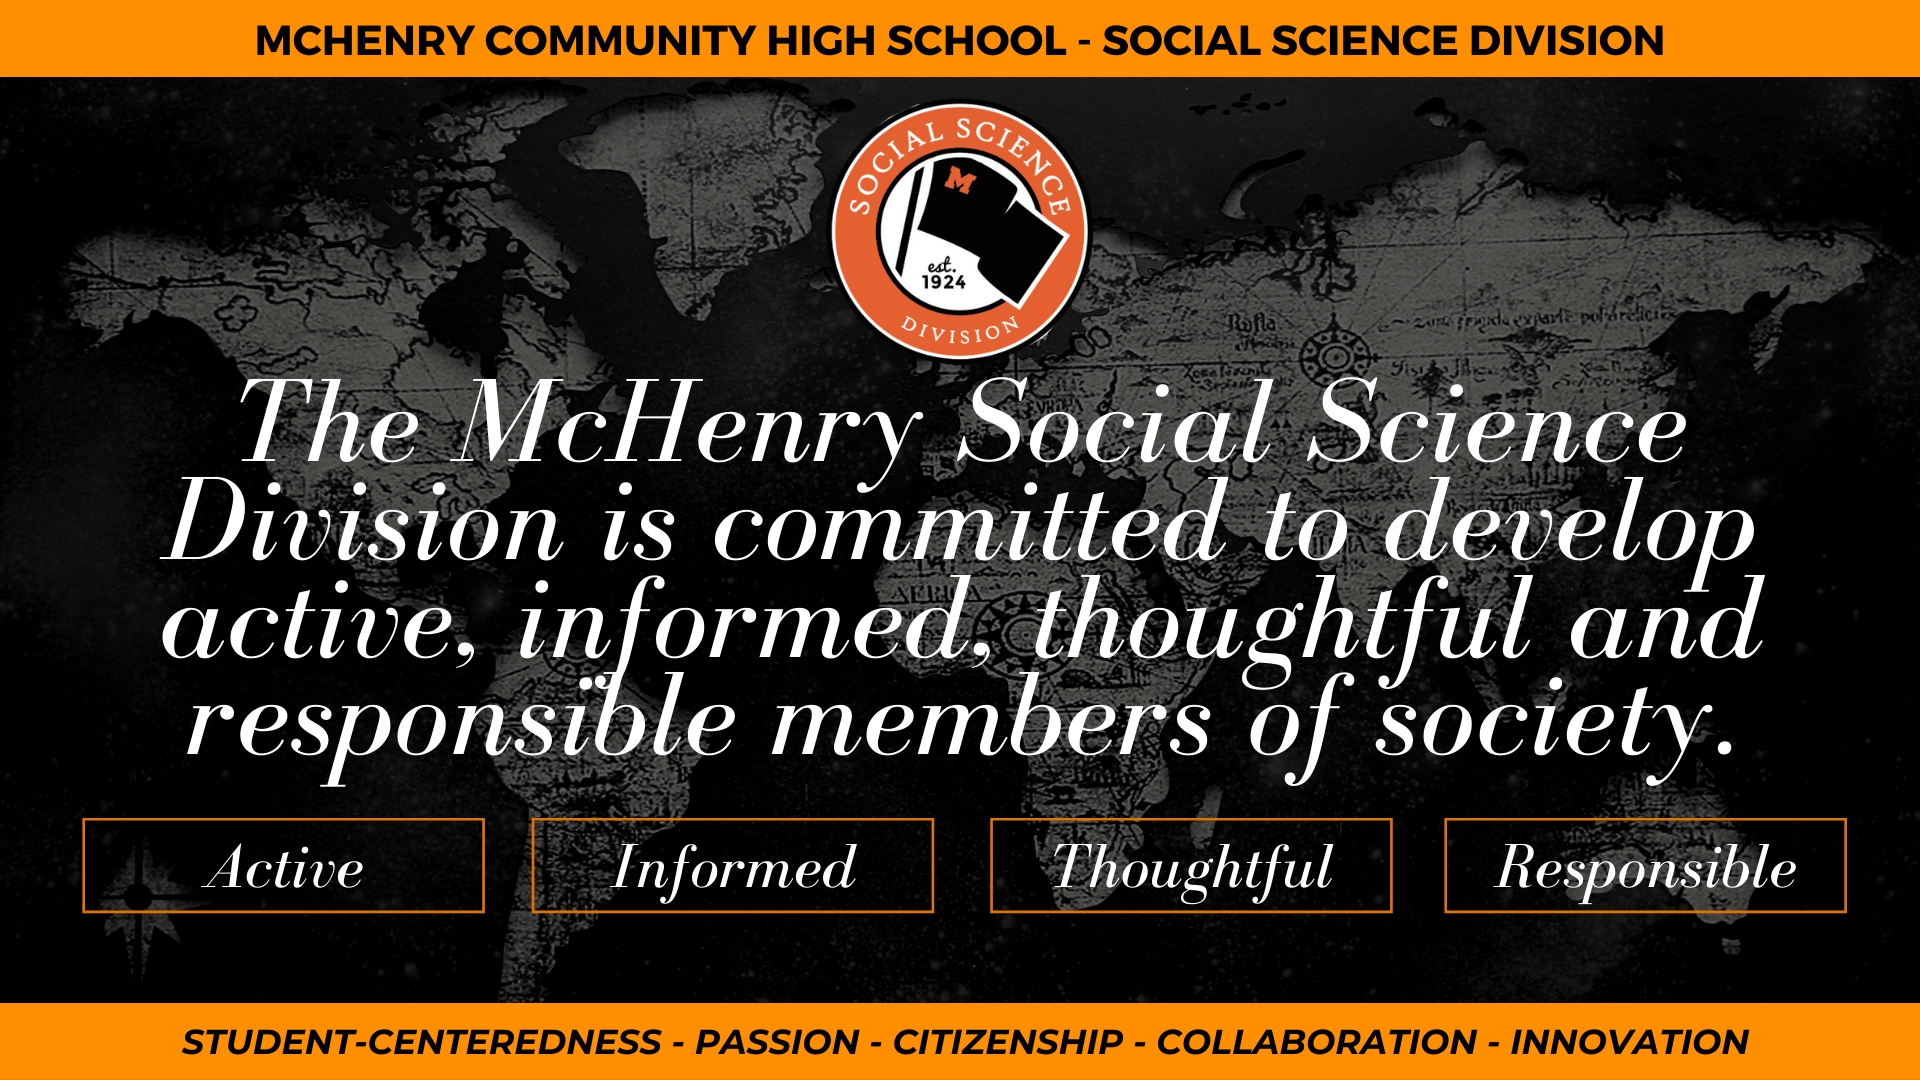 McHenry Community High School- Social Science Division The McHeSocial Science Division is committed to develop active, informed, thoughtful, and responsible members of society. Active Informed Thoughtful Responsible Student -Centeredness- Passion- Citizenship- Collaboration- Innovation